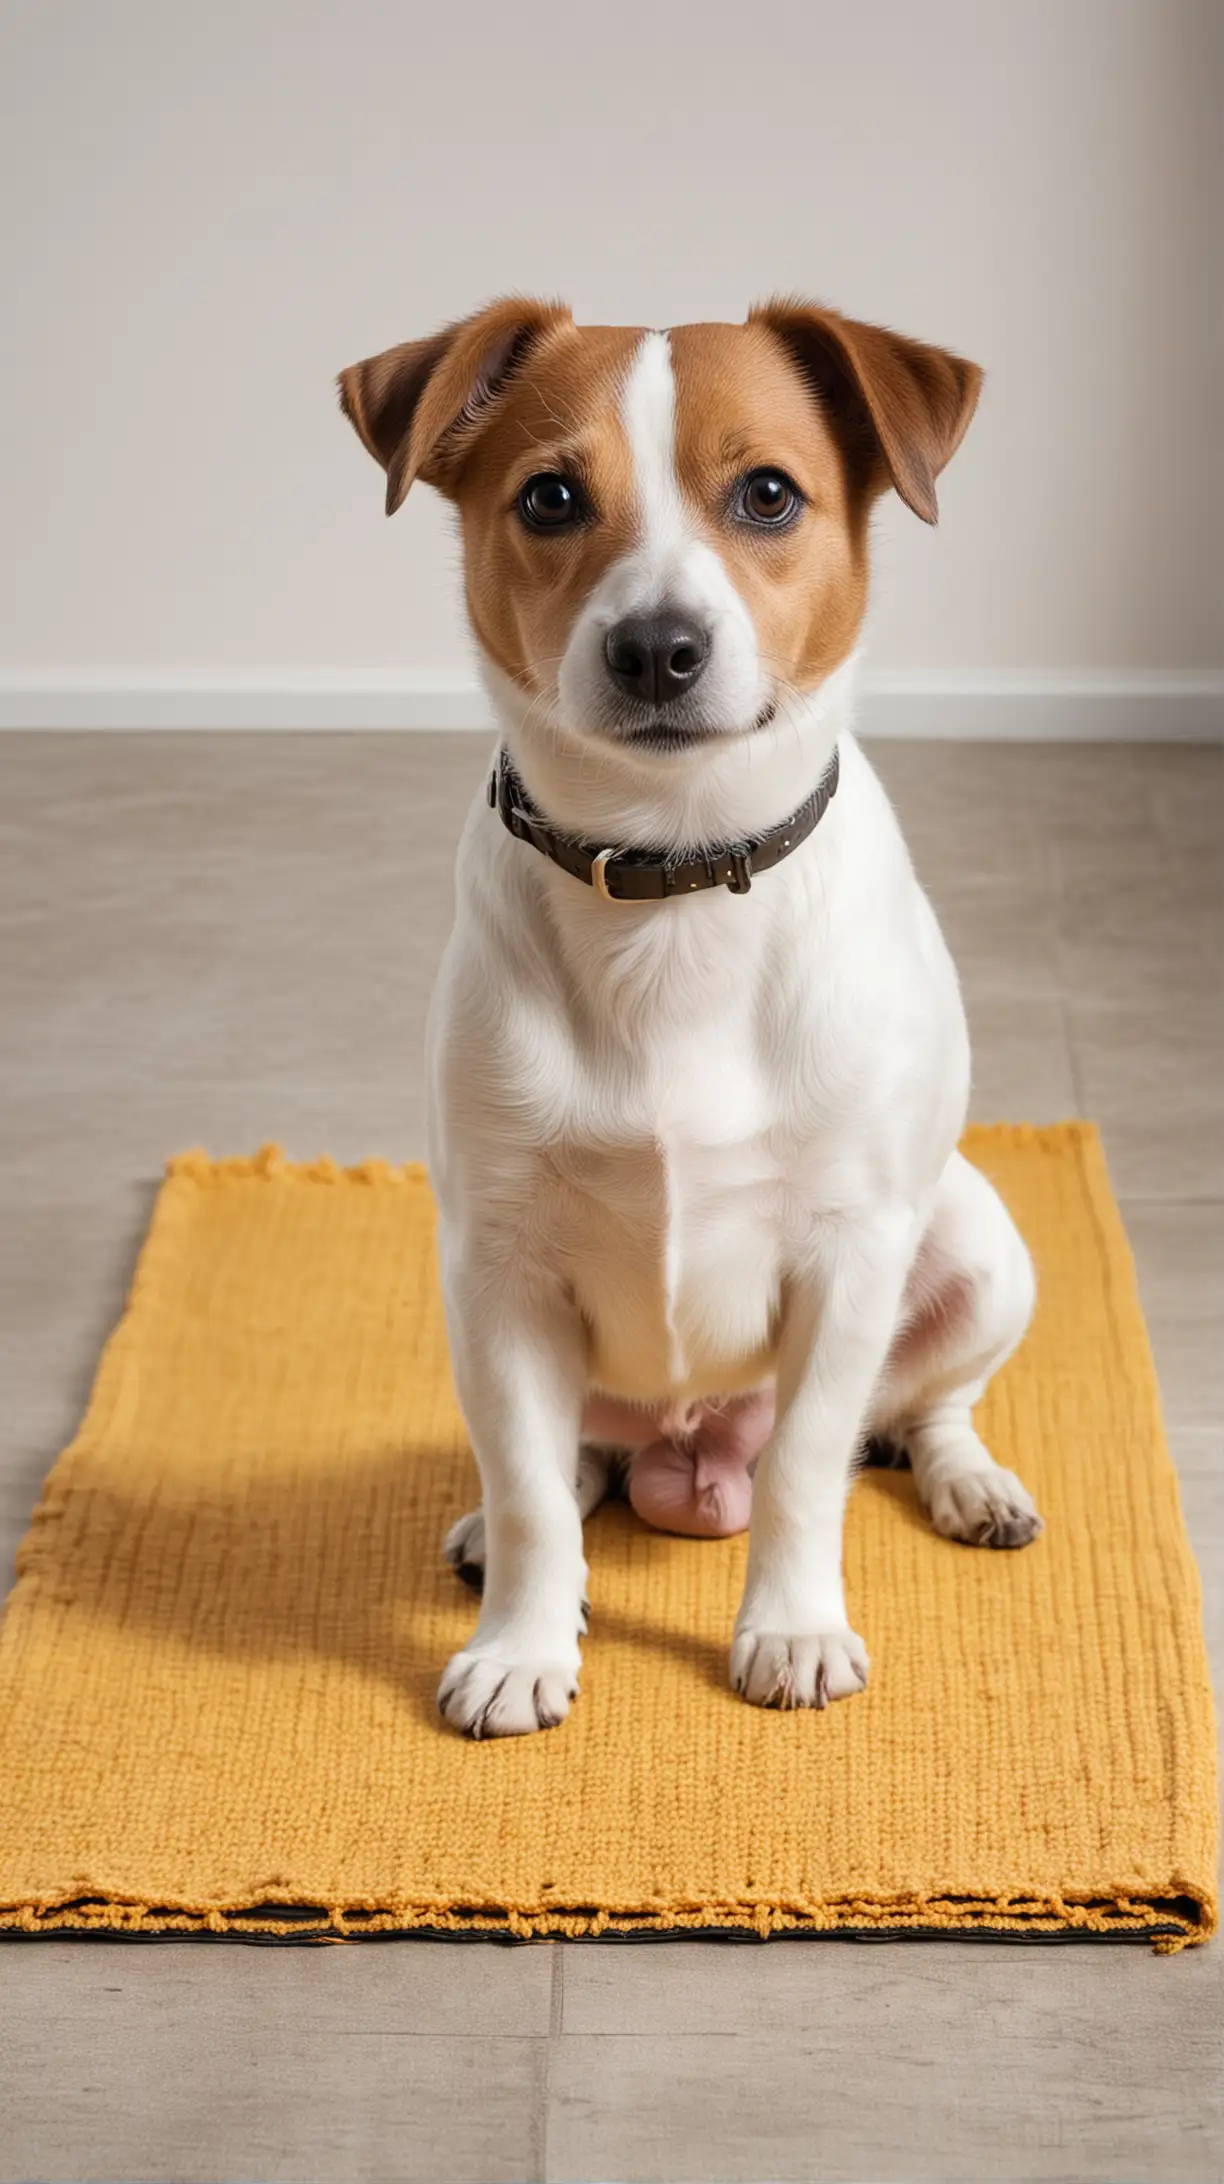 Jack Russell sitting in front of the camera on a mat, no background